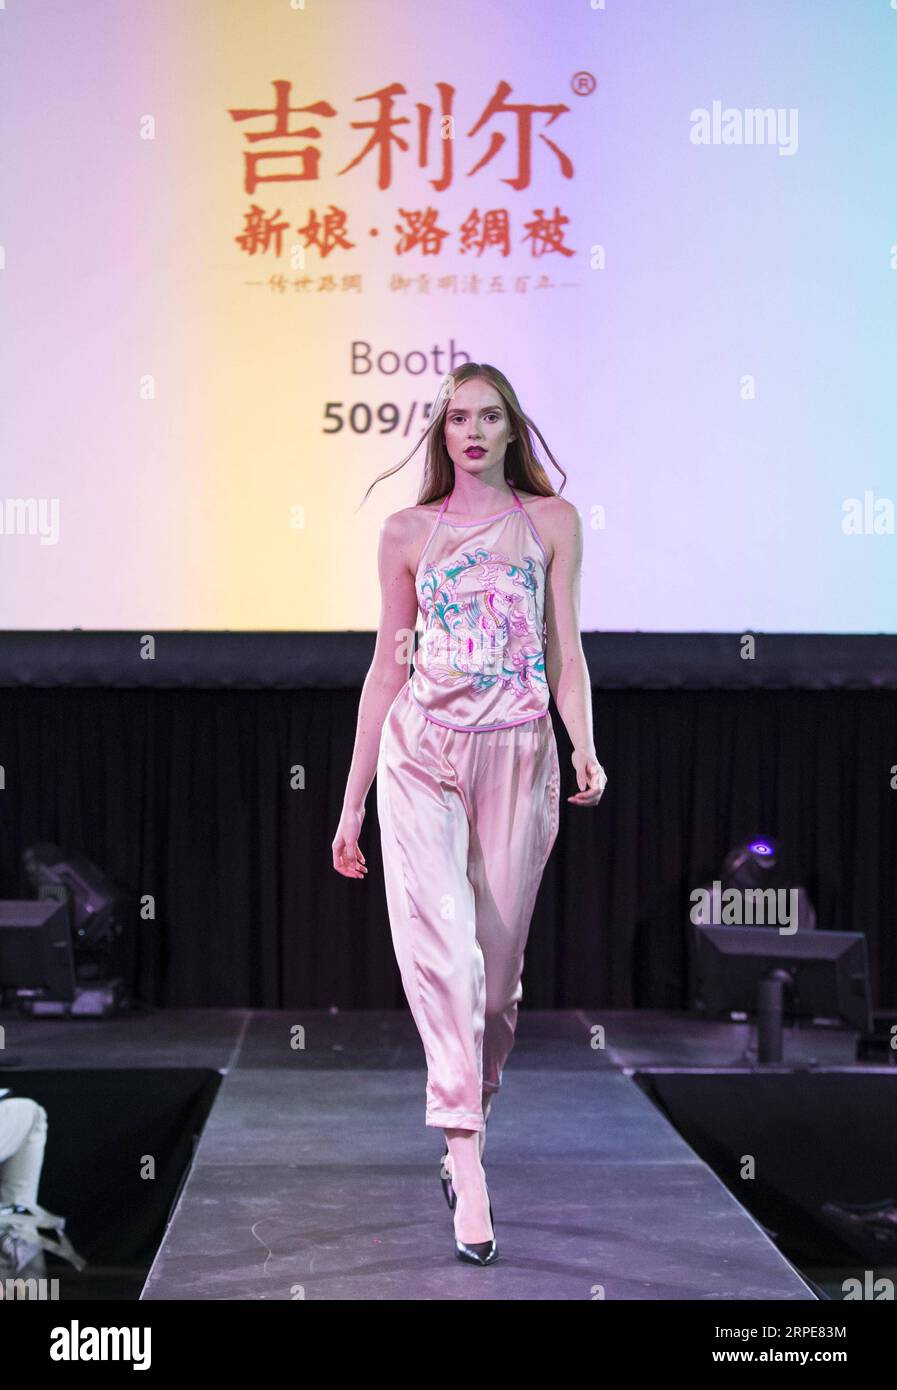 (190820) -- TORONTO, Aug. 20, 2019 -- A model presents a creation during the fashion show of the 2019 Apparel Textile Sourcing Canada trade show in Toronto, Canada, on Aug. 20, 2019. The fashion show displayed the latest designs from dozens of fashion brands around the world on Tuesday. (Photo by /Xinhua) CANADA-TORONTO-APPAREL TEXTILE SOURCING TRADE SHOW-FASHION ZouxZheng PUBLICATIONxNOTxINxCHN Stock Photo